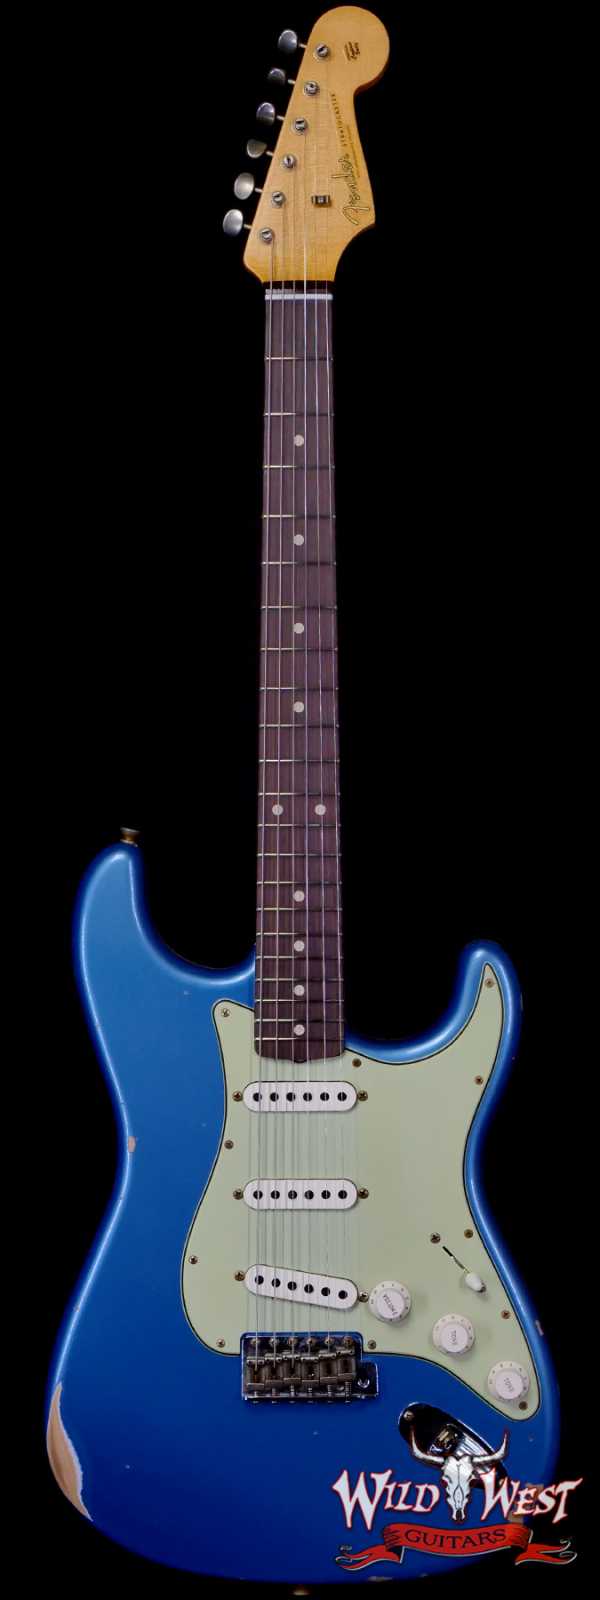 Fender Custom Shop 1962 Stratocaster Hand-Wound Pickups AAA Dark Rosewood Slab Board Relic Lake Placid Blue 7.65 LBS